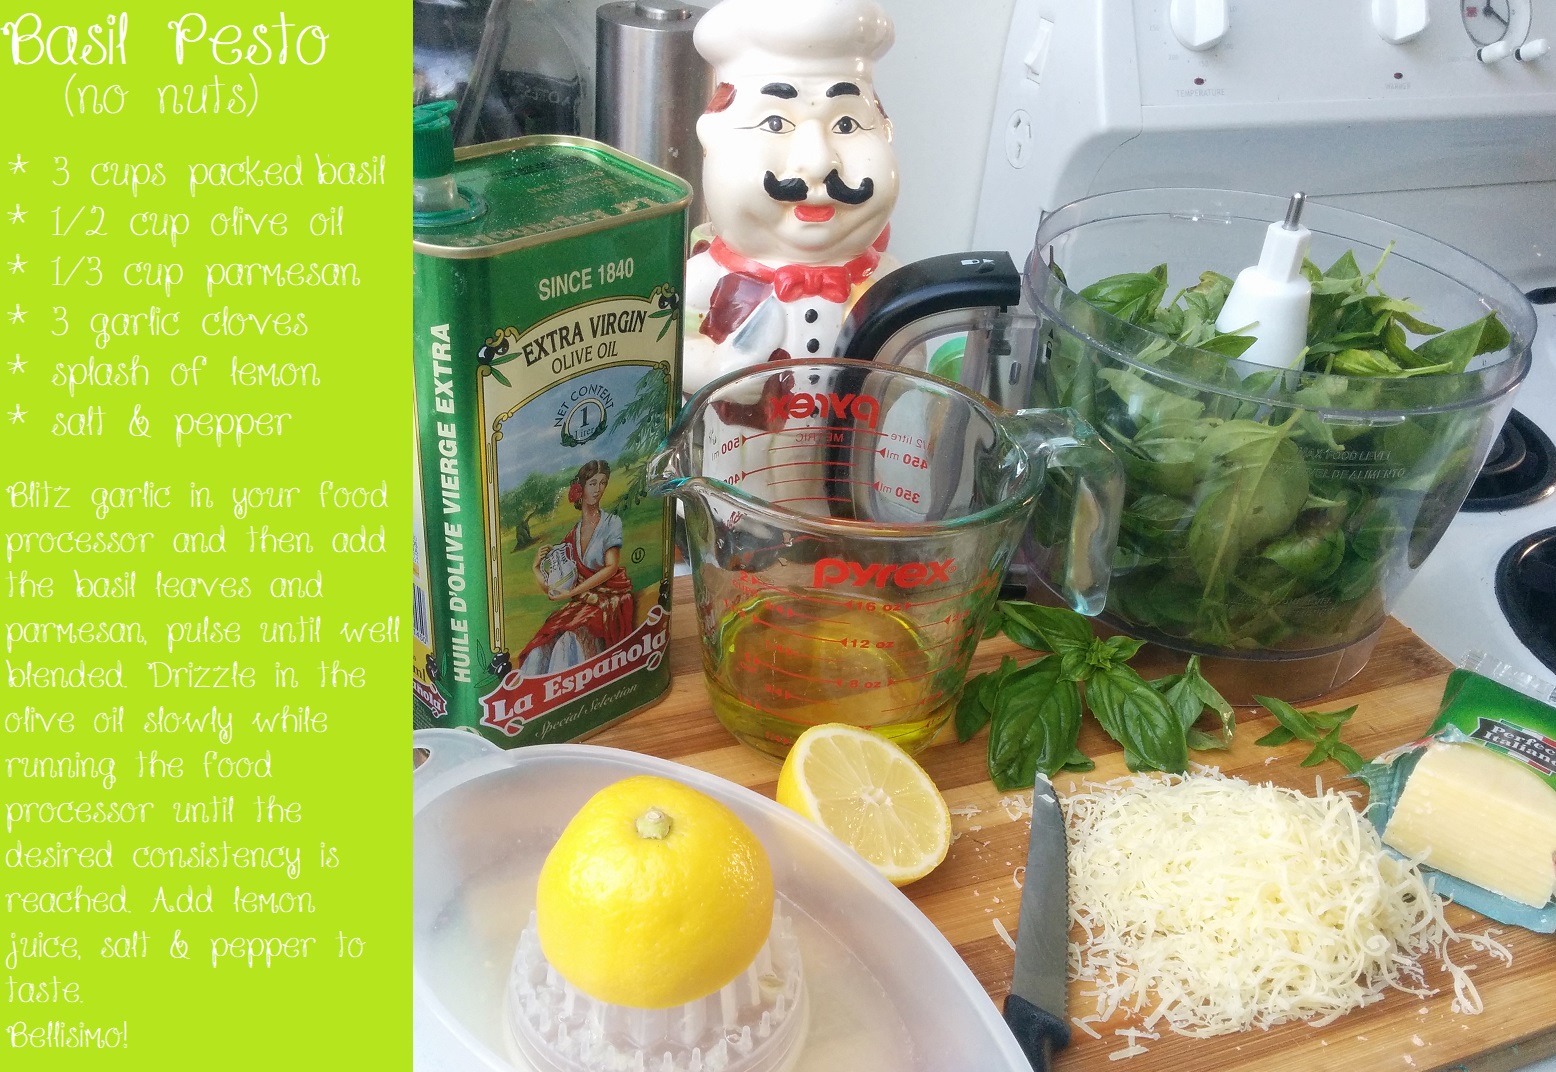 Learn how easy it is to make Basil Pesto from scratch. Flavorful and